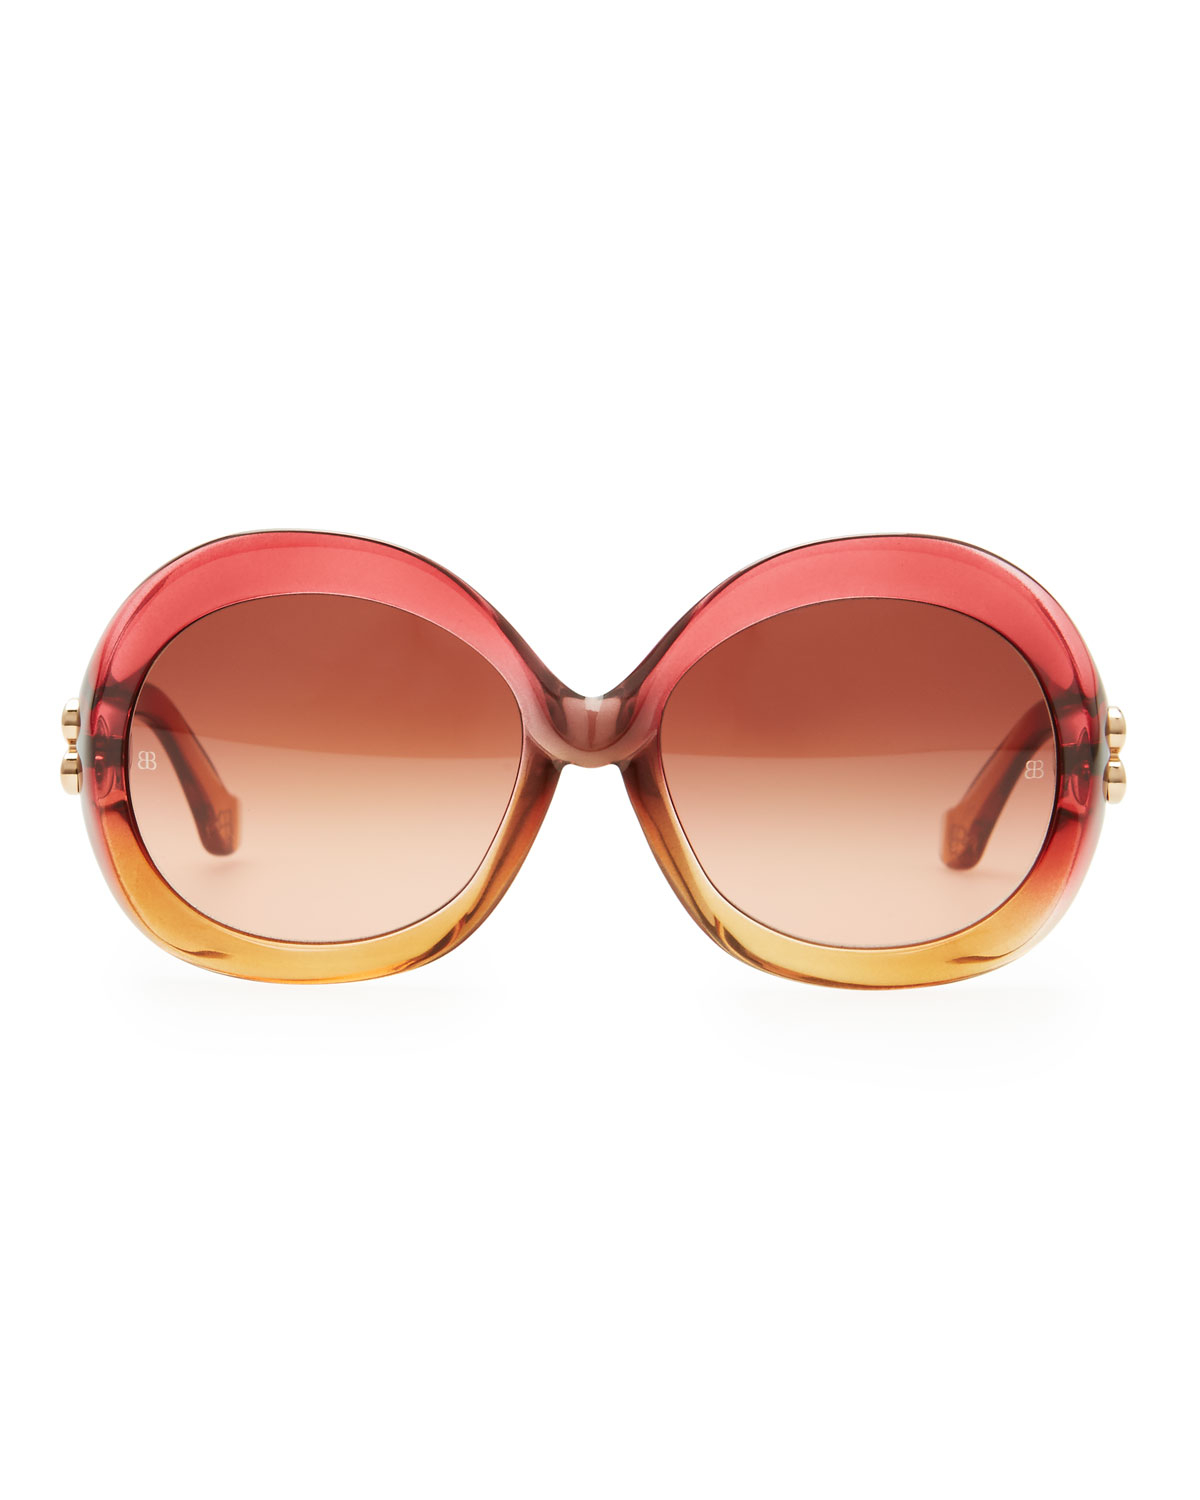 Lyst - Balenciaga Oversized Round Sunglasses in Red